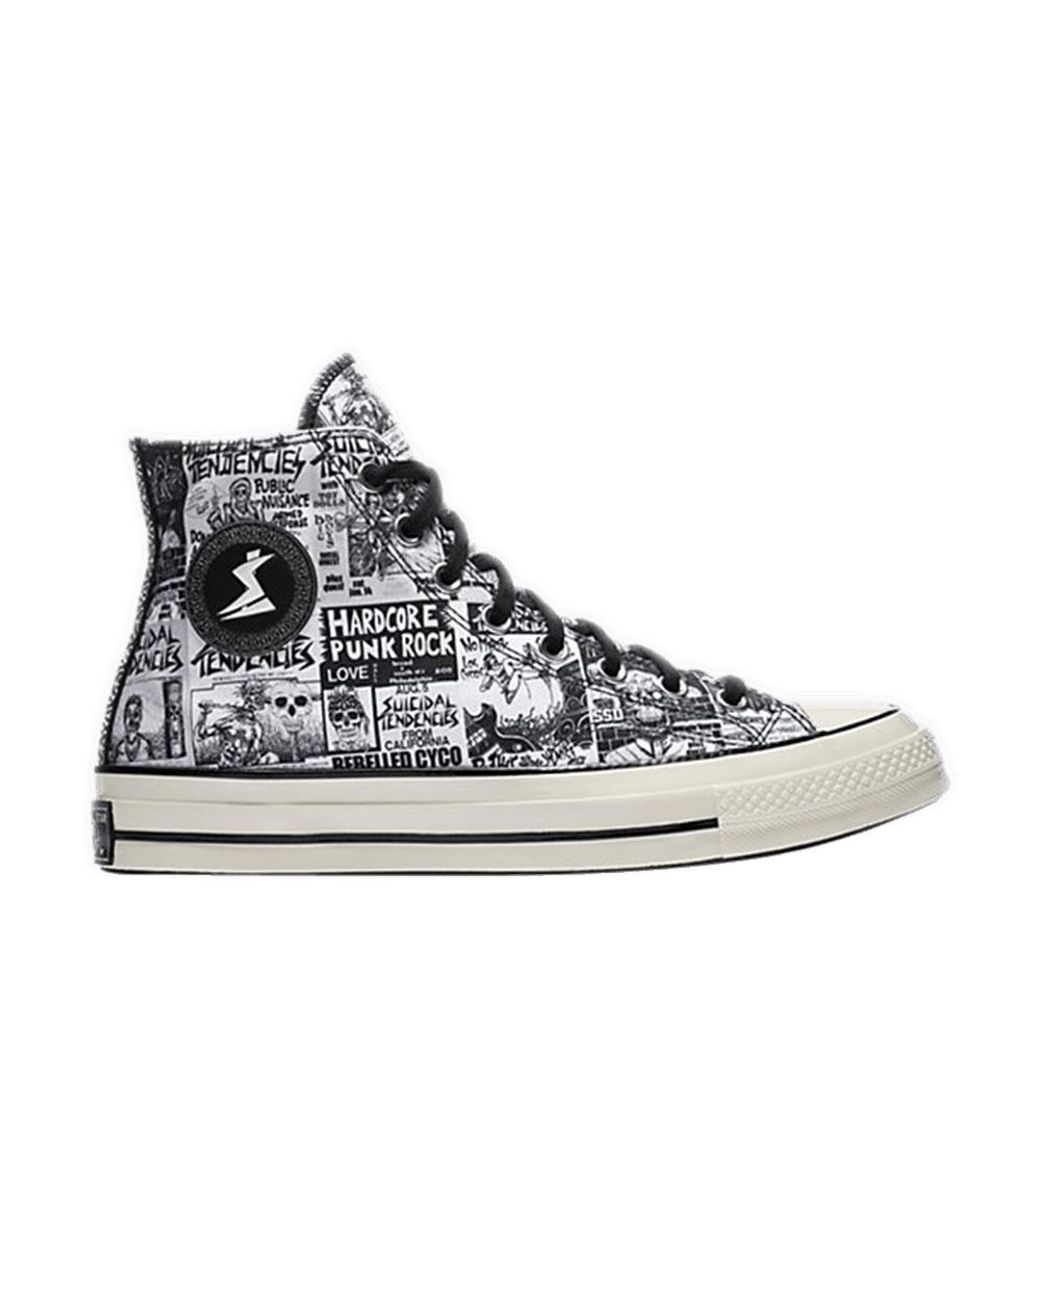 Converse Suicidal Tendencies X Chuck 70 Hi in White for Men - Lyst